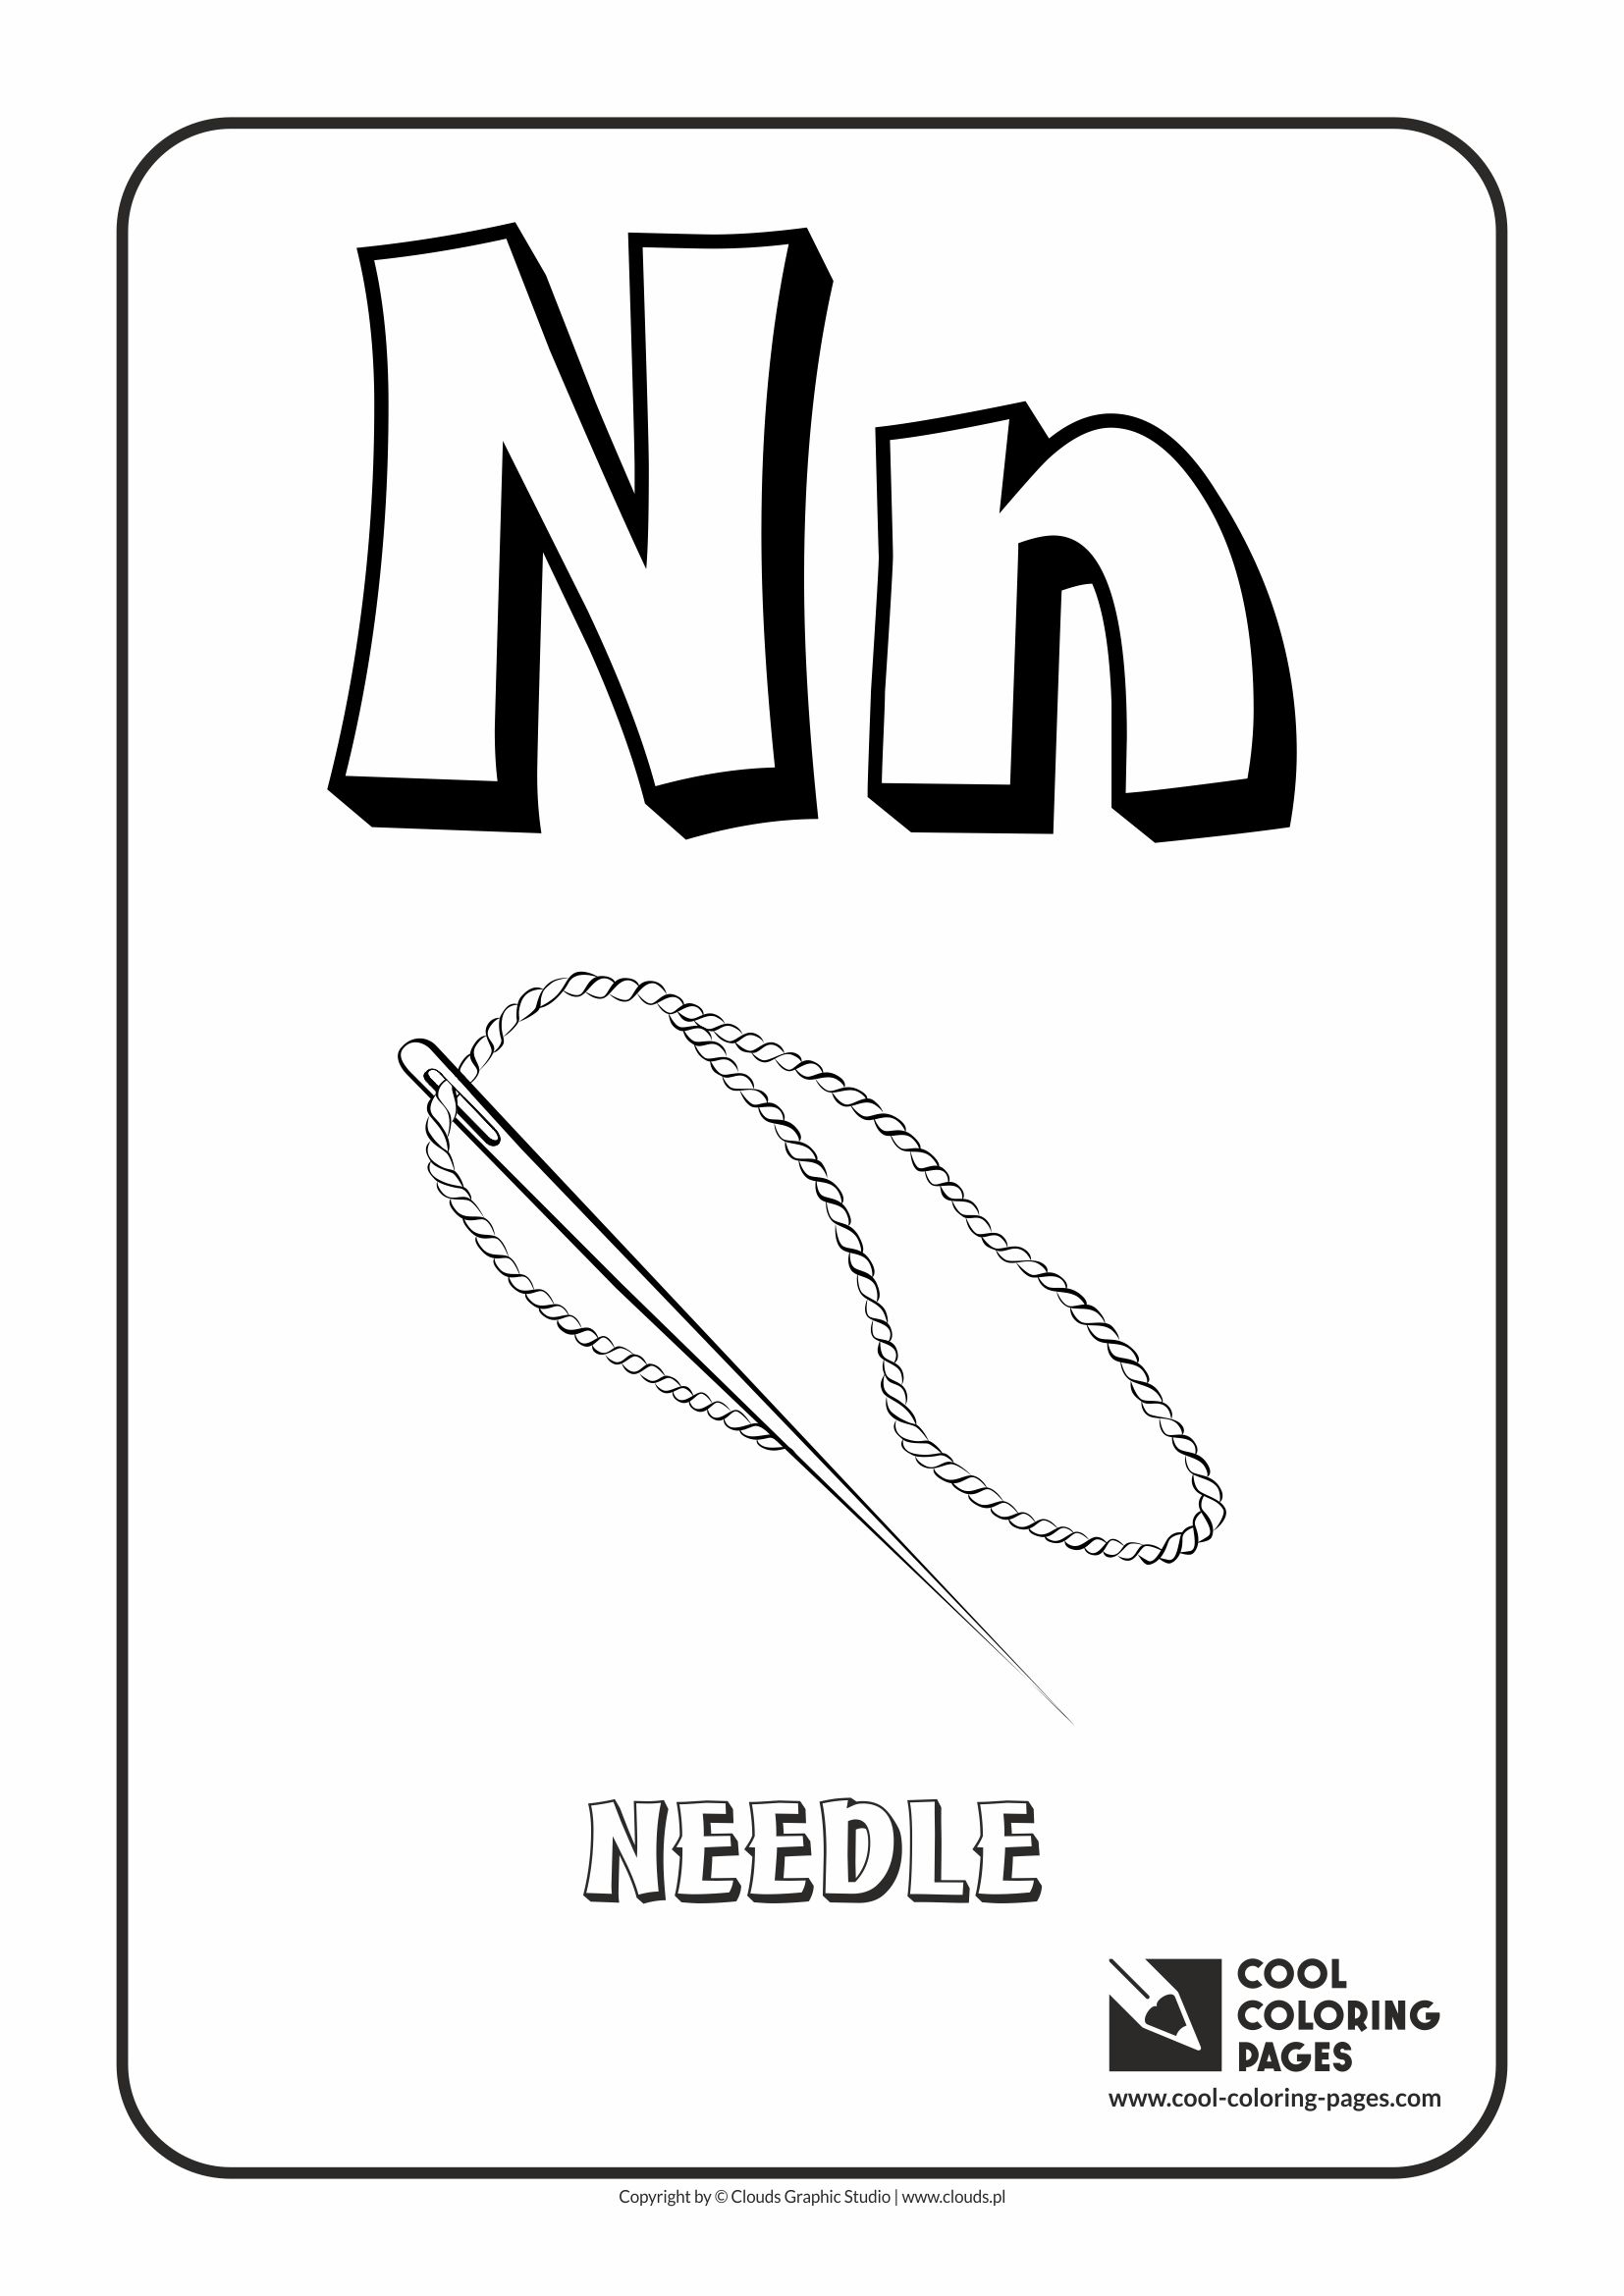 Cool Coloring Pages - Alphabet / Letter N / Coloring page with letter N